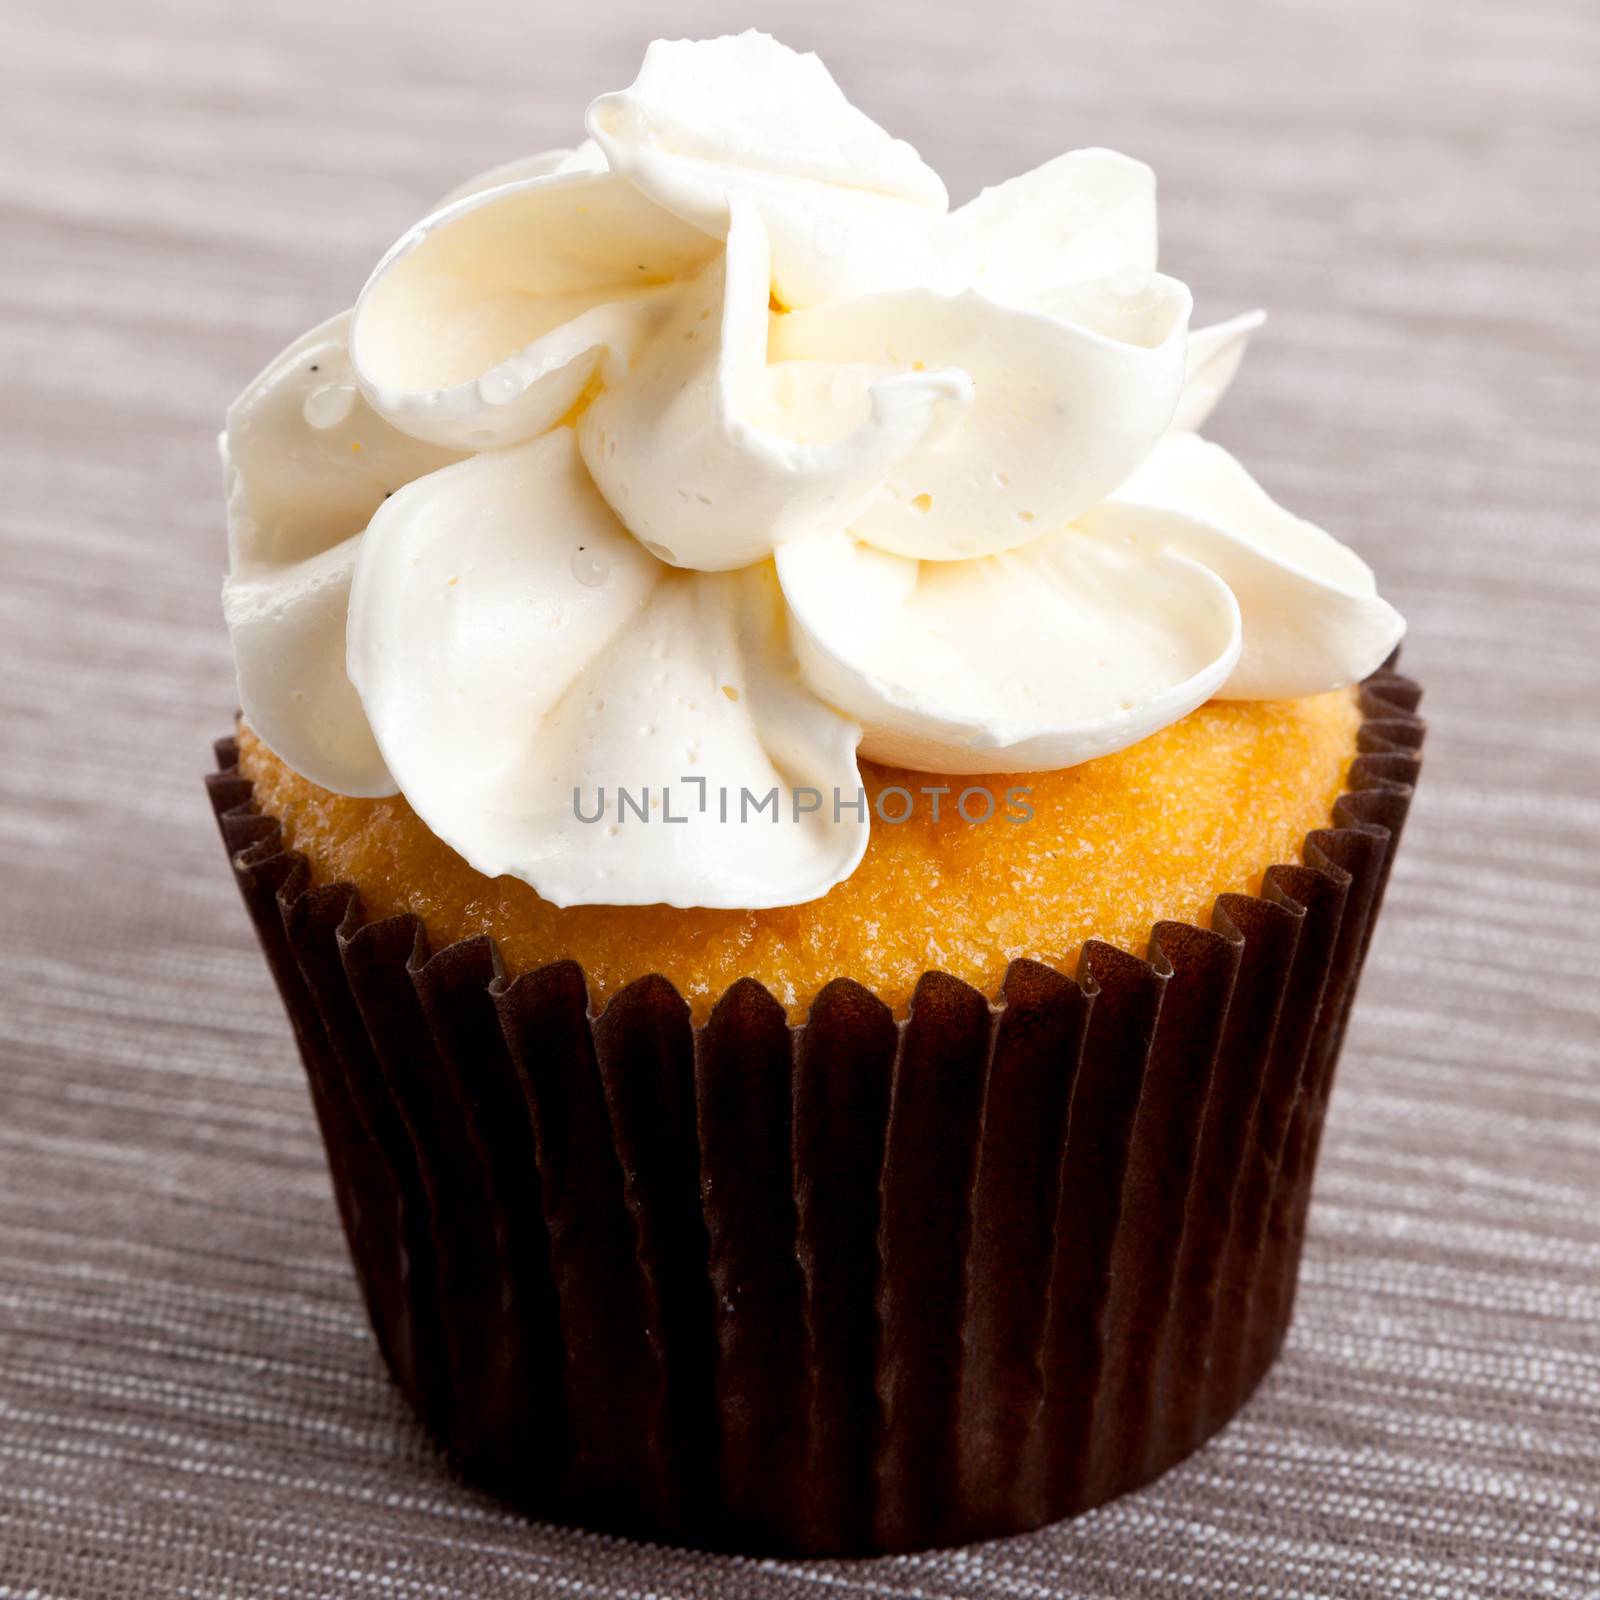 tasty sweet homemade cupcakes with cream on table by juniart